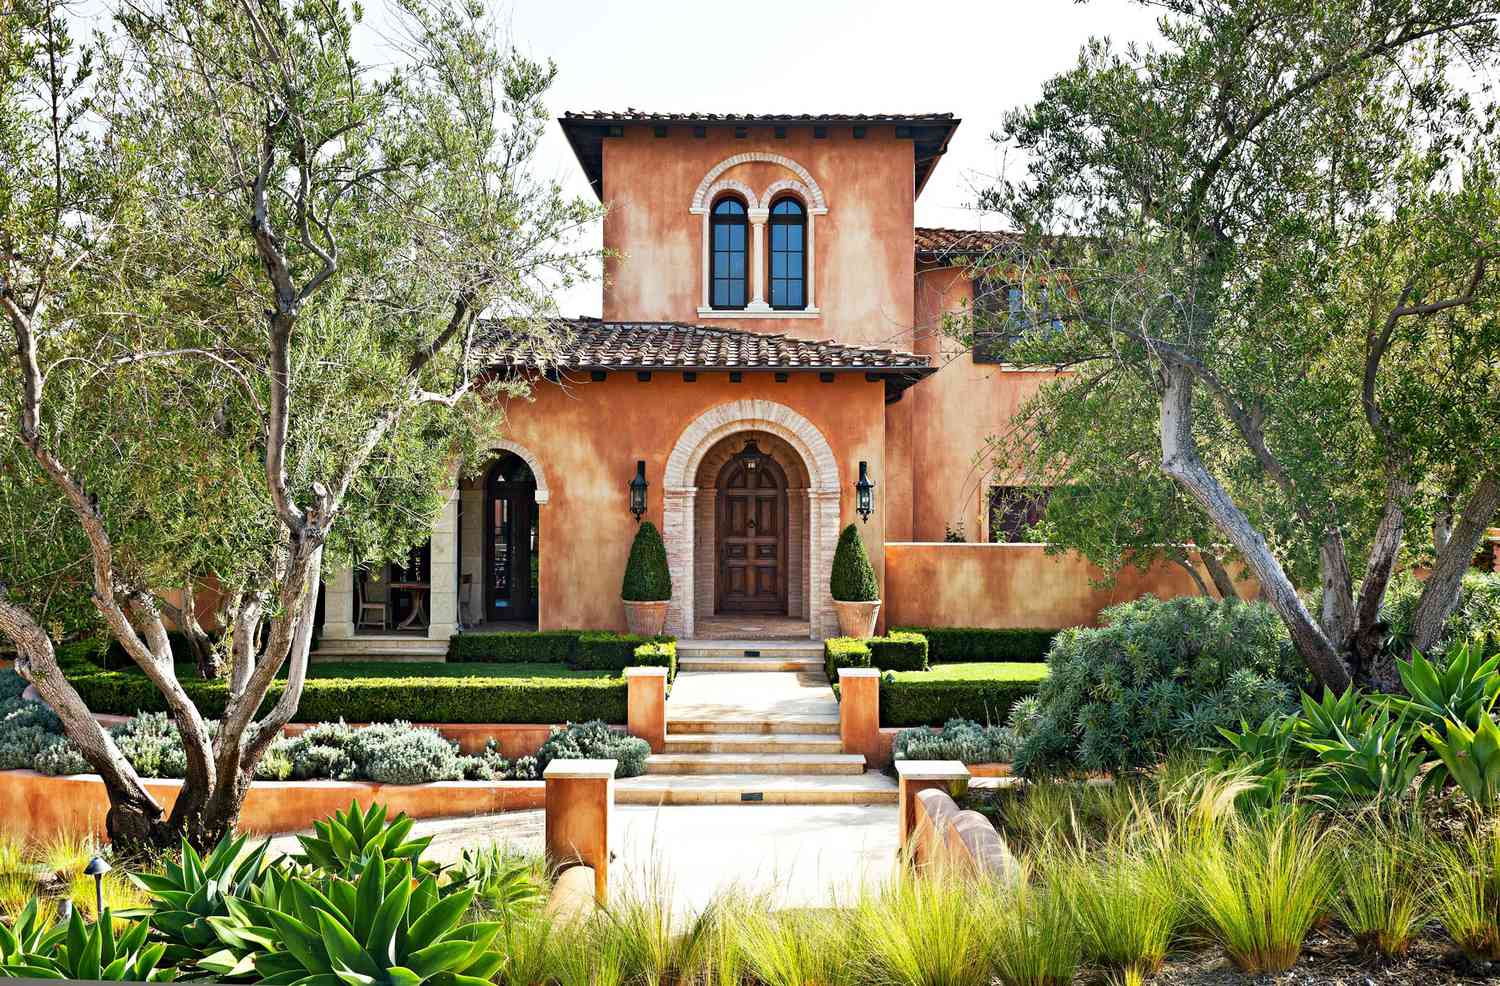 castle-inspired stucco home